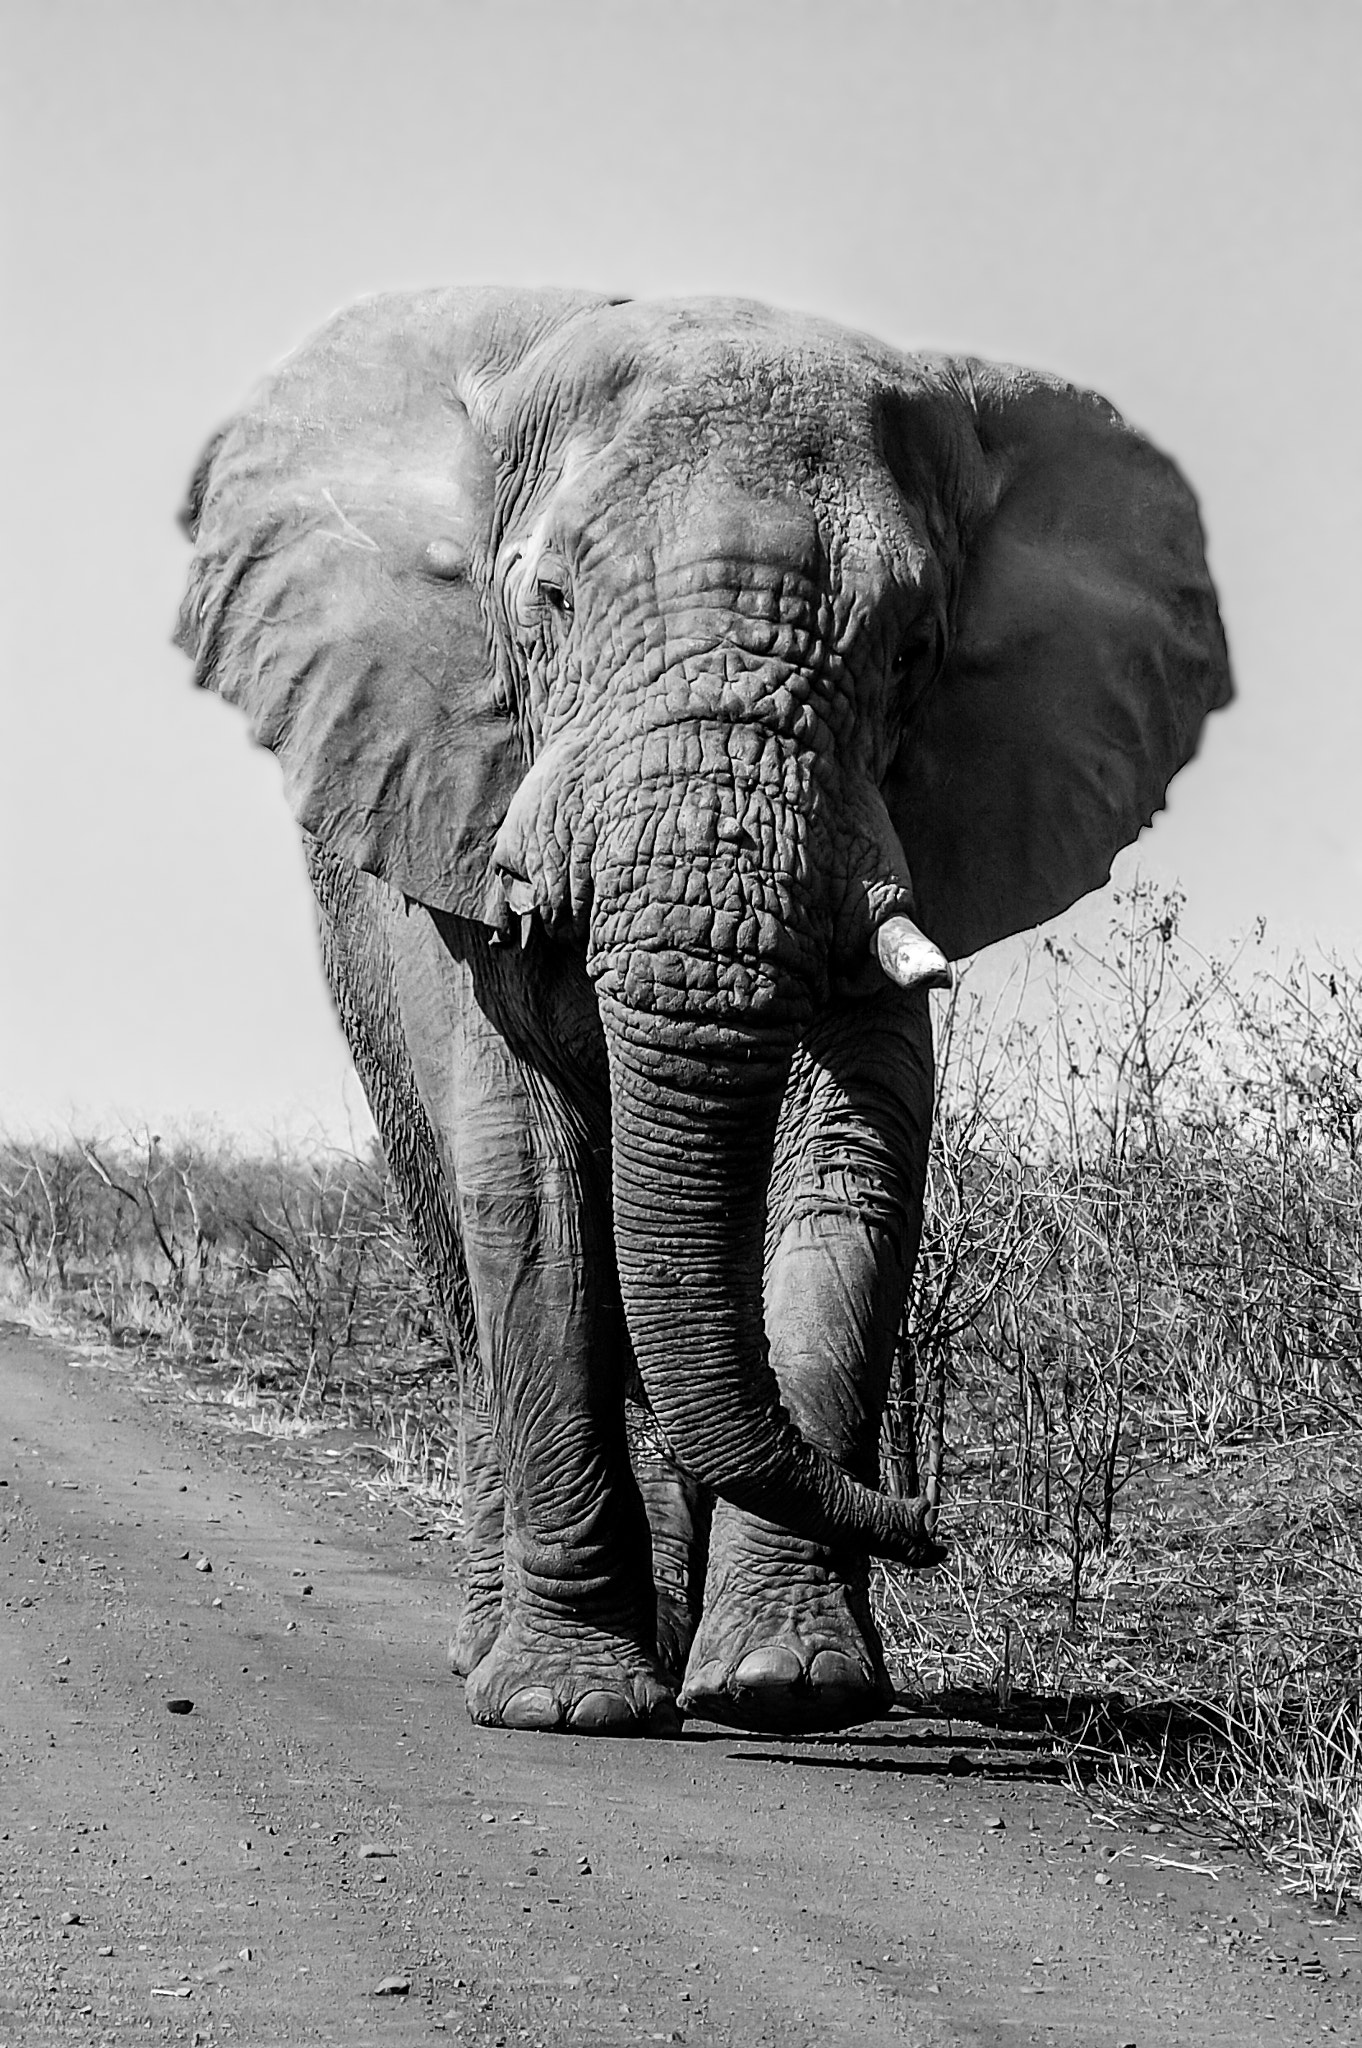 Pentax *ist DS sample photo. Old elephant photography